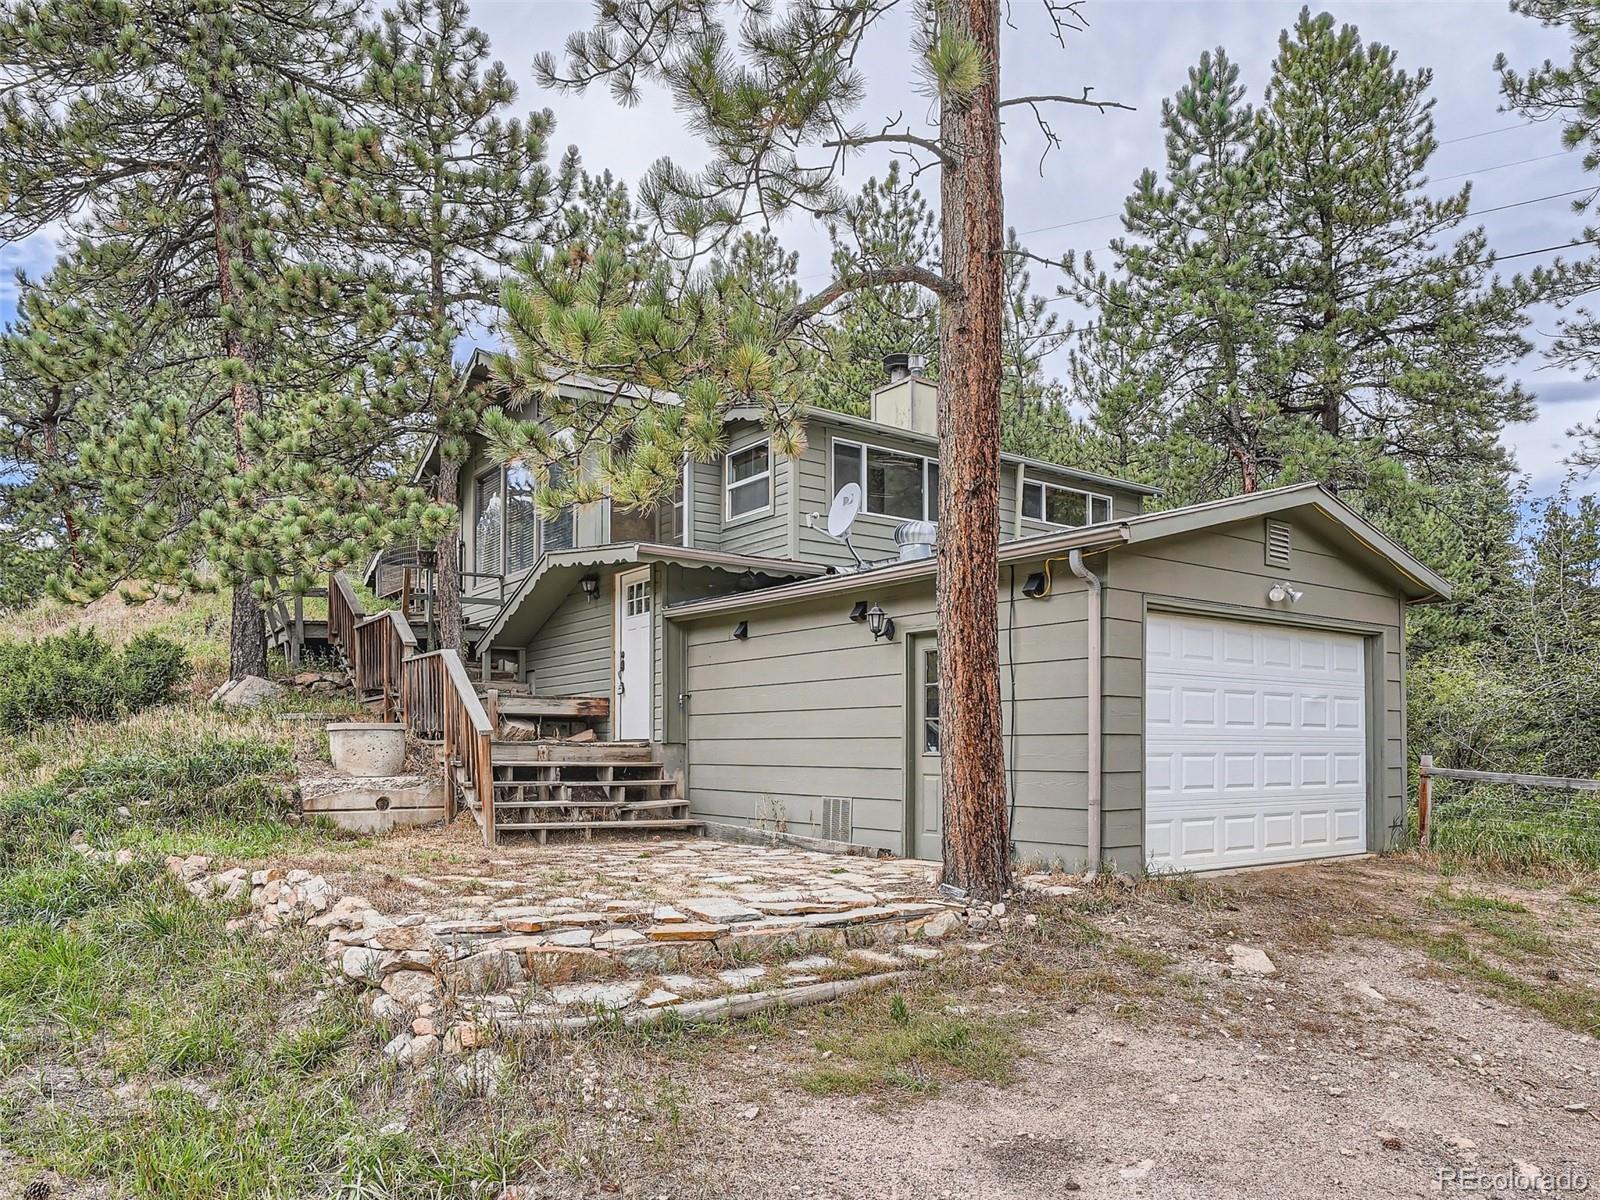 11799  ranch elsie road, Golden sold home. Closed on 2024-03-01 for $435,000.